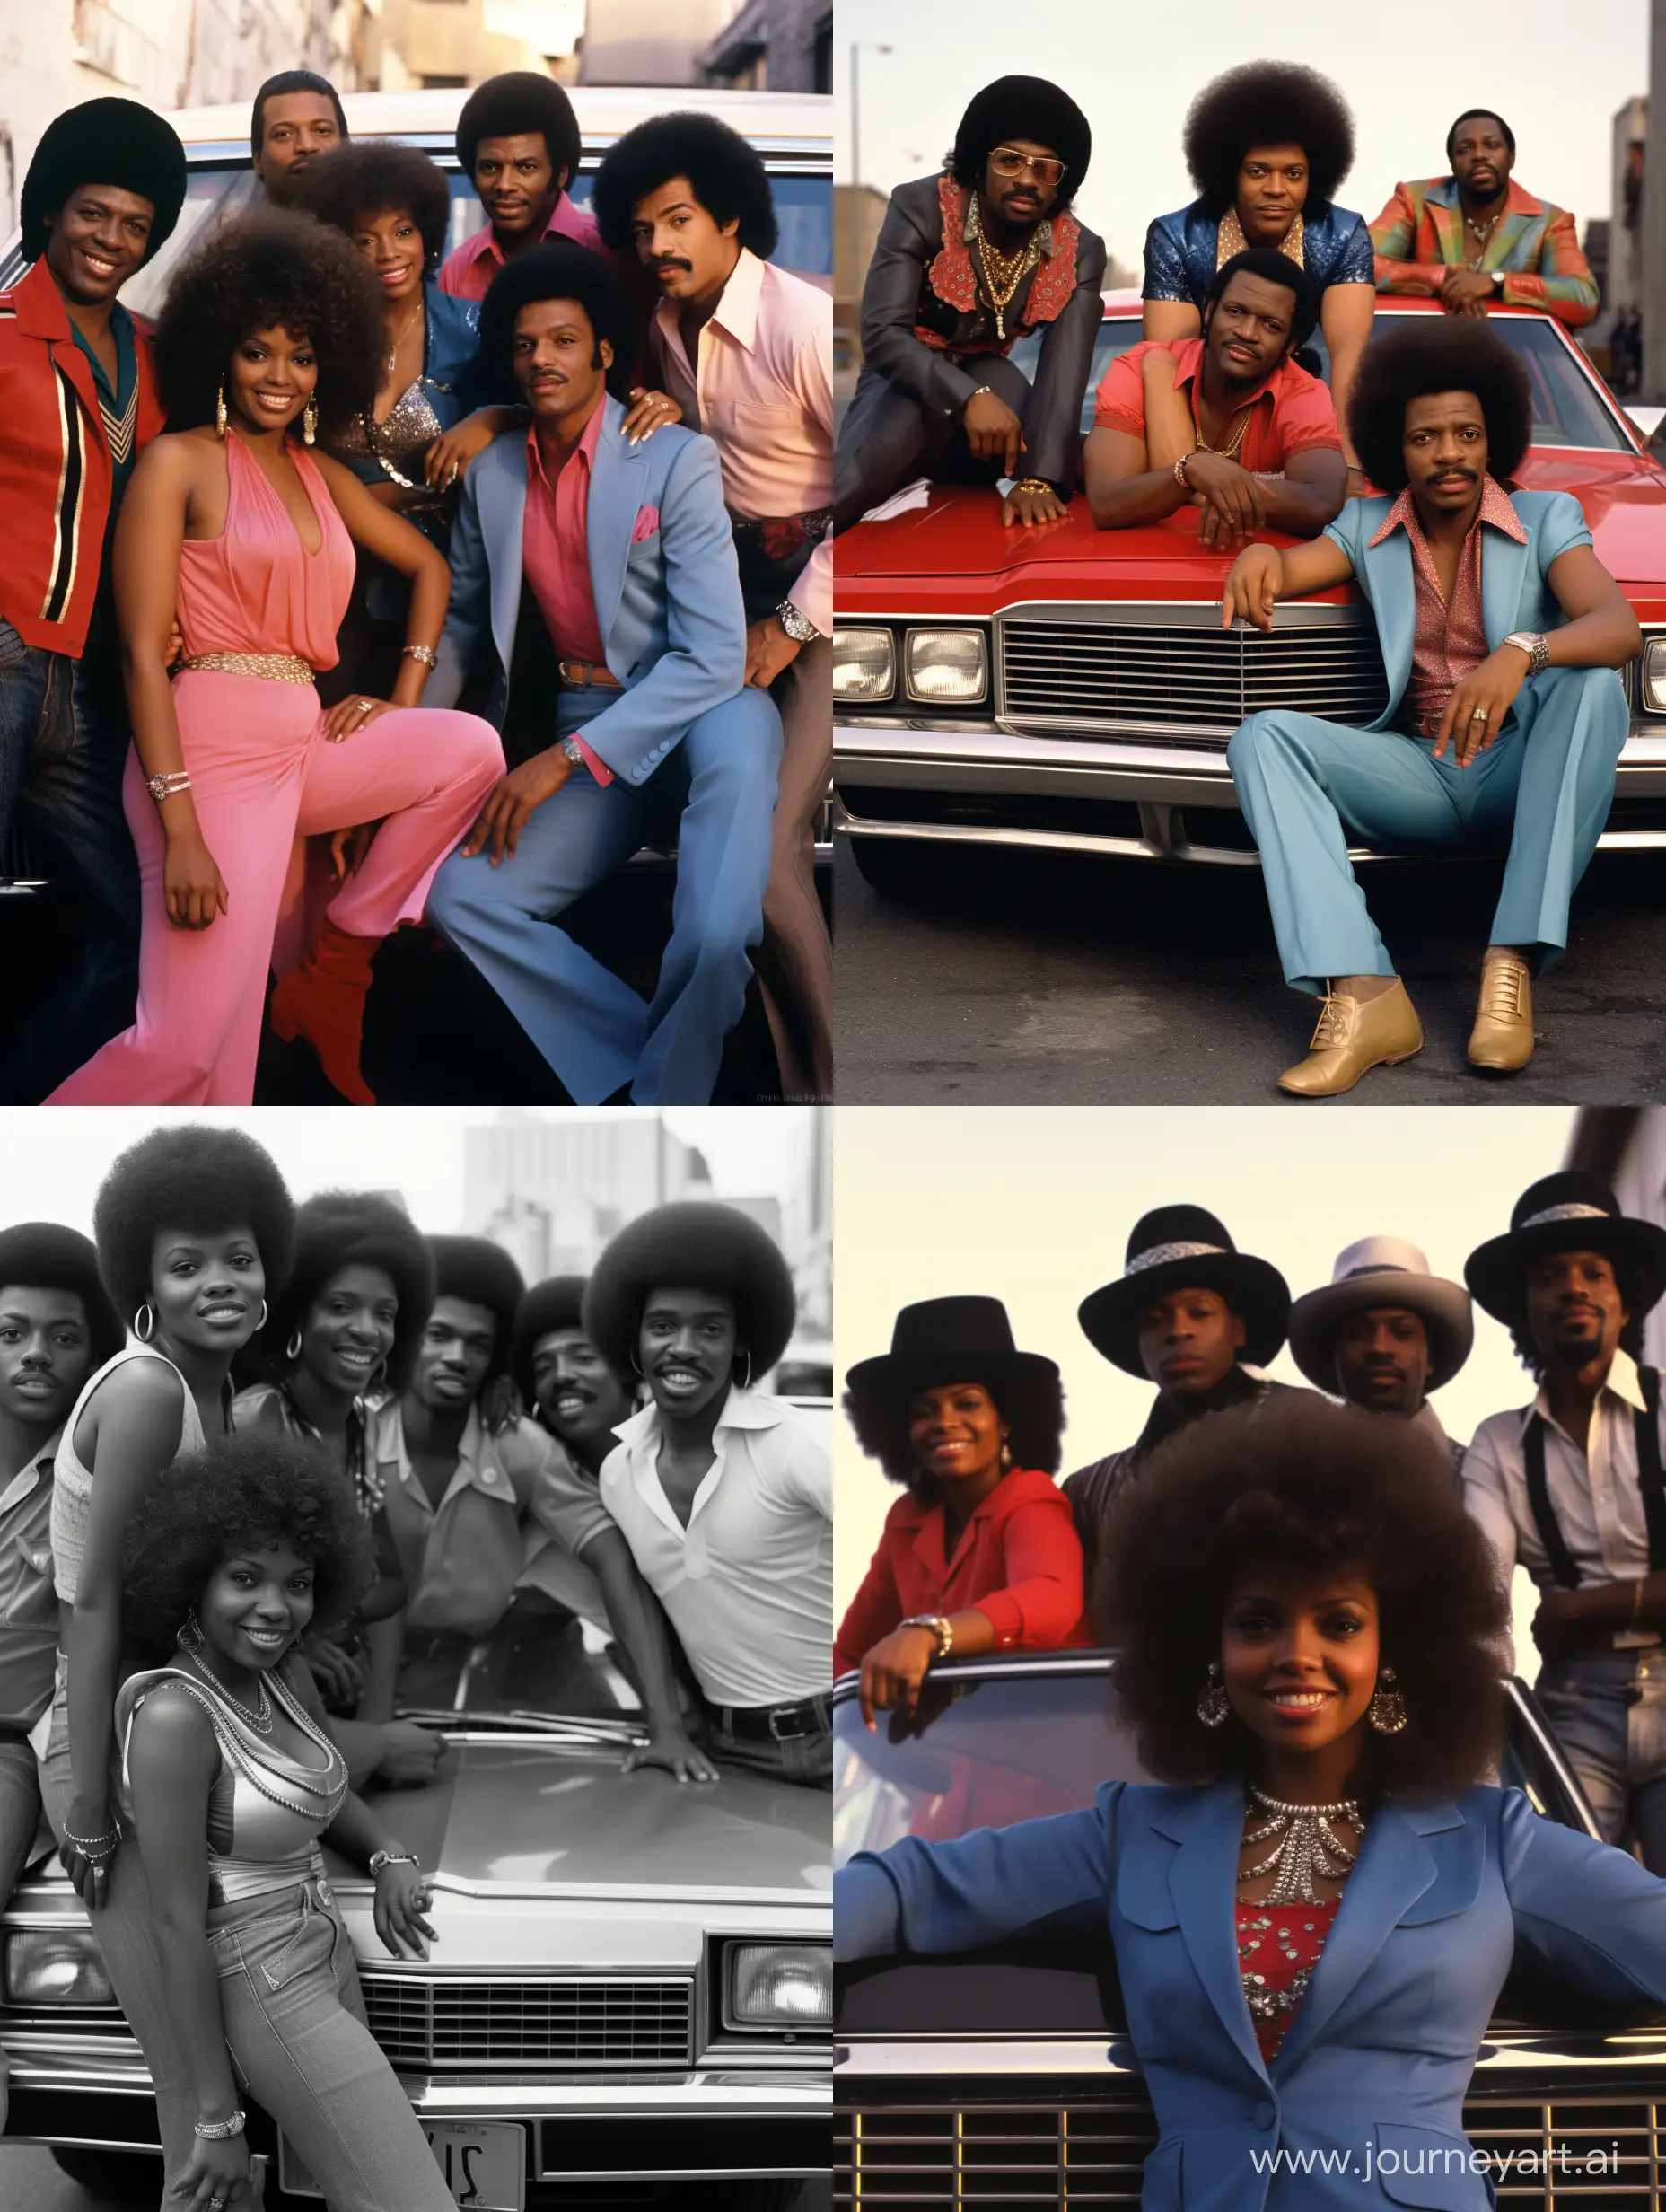 Black people in group photo with curly hair
Jheri curls and perms in 1982 early 80s with classic 1950's cadillac cars